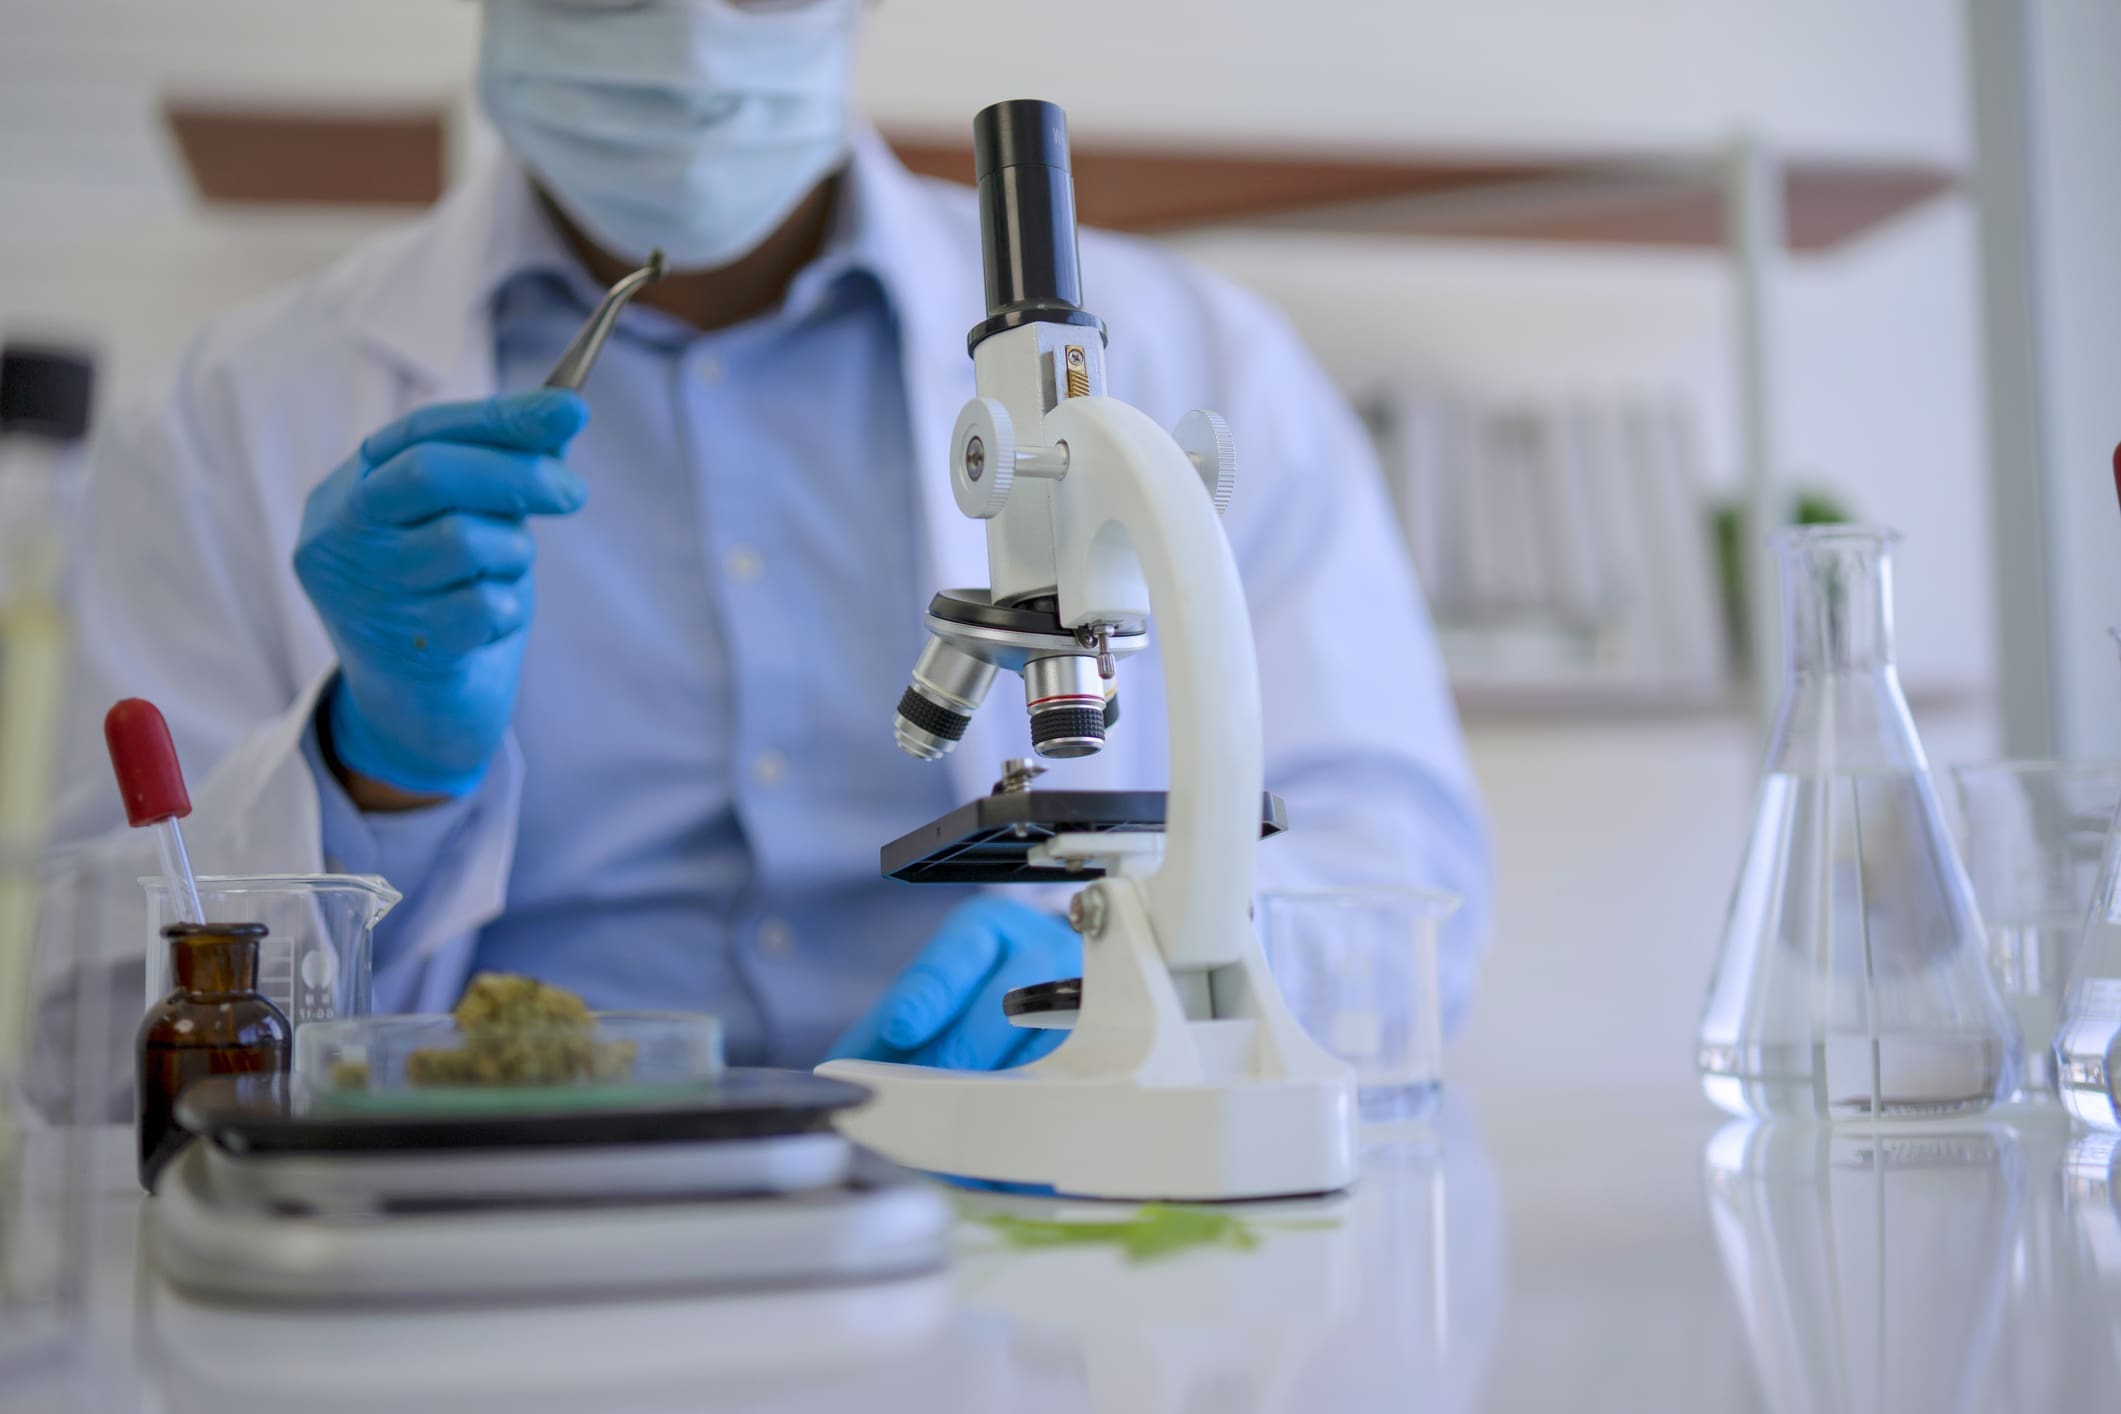 Scientist Is Working With Cannabis At Laboratory